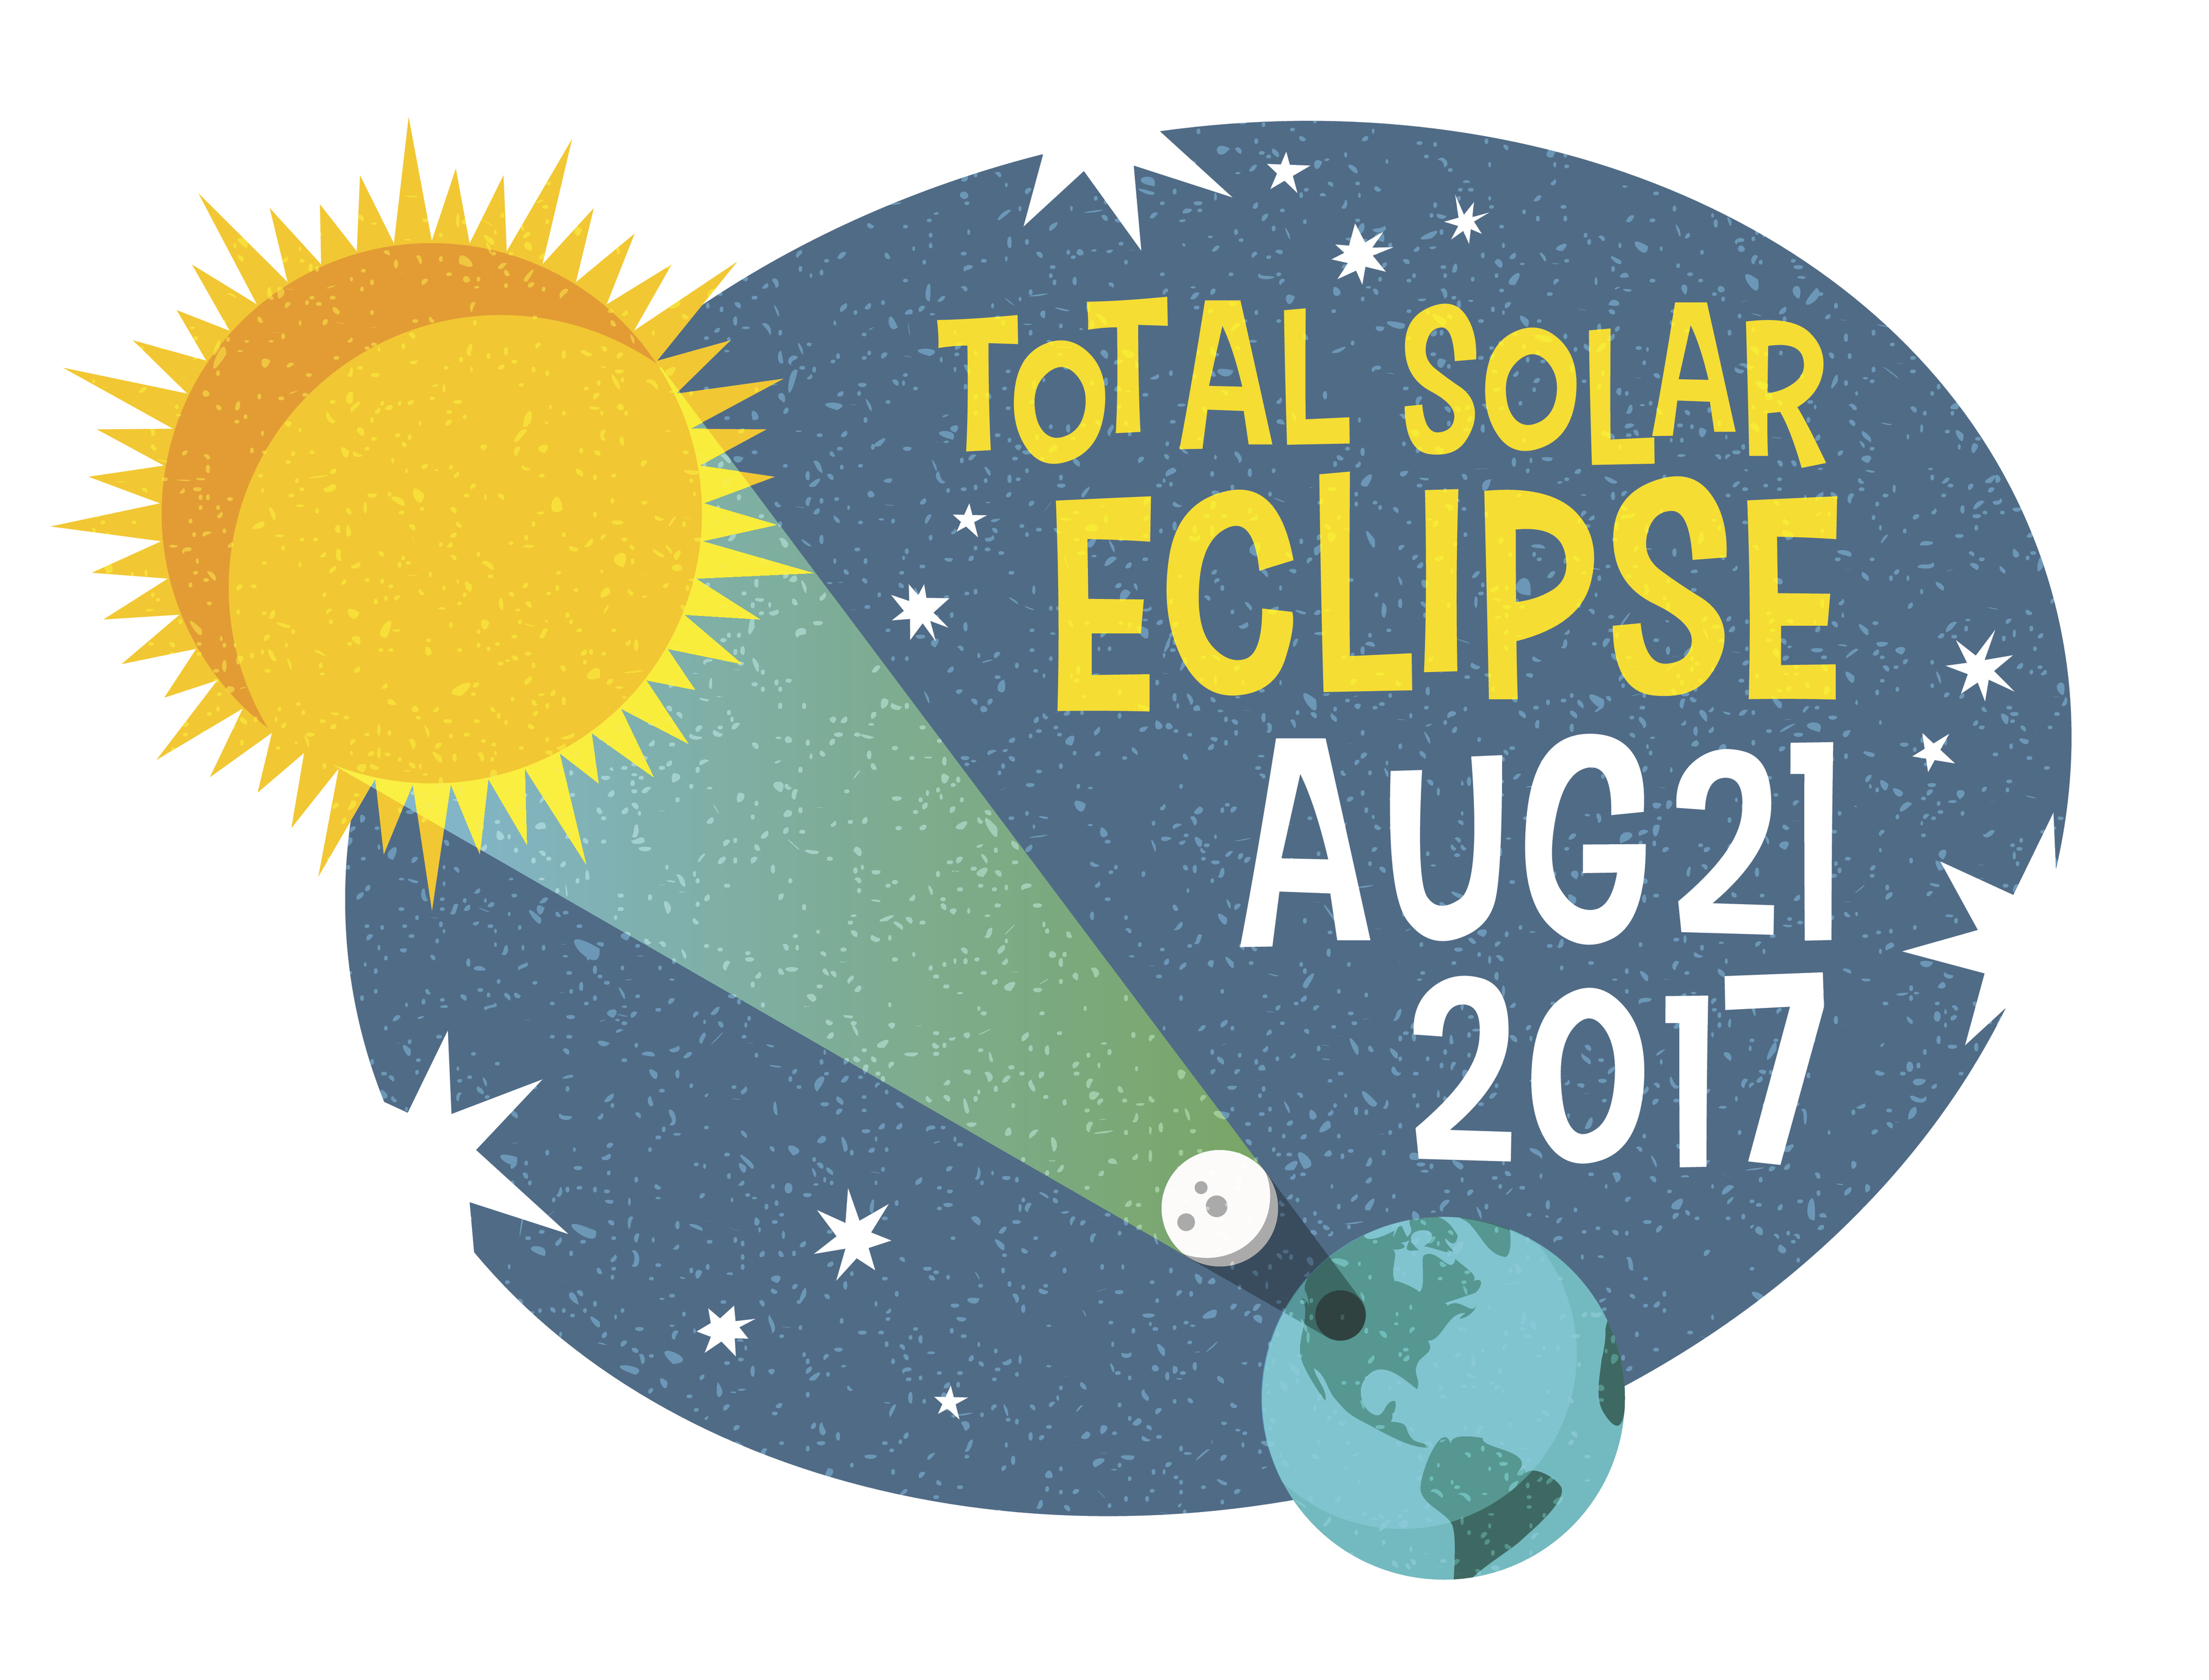 2017 clipart solar eclipse. Of the heart inside